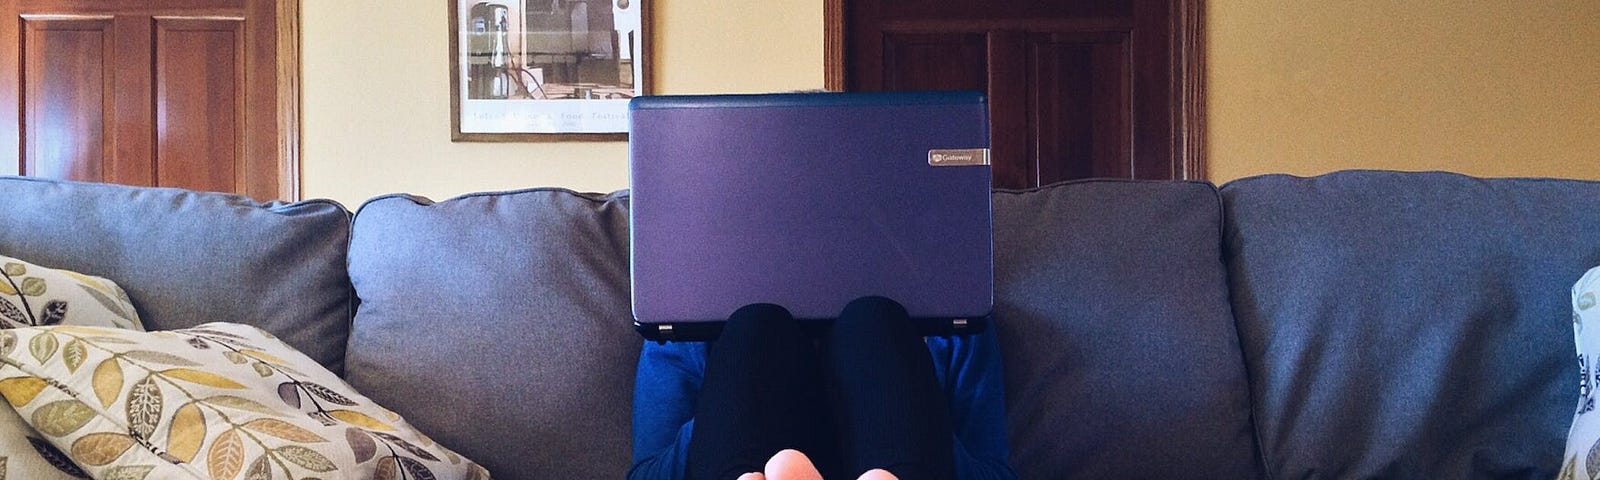 Person Sitting on Couch While Using Laptop Computer